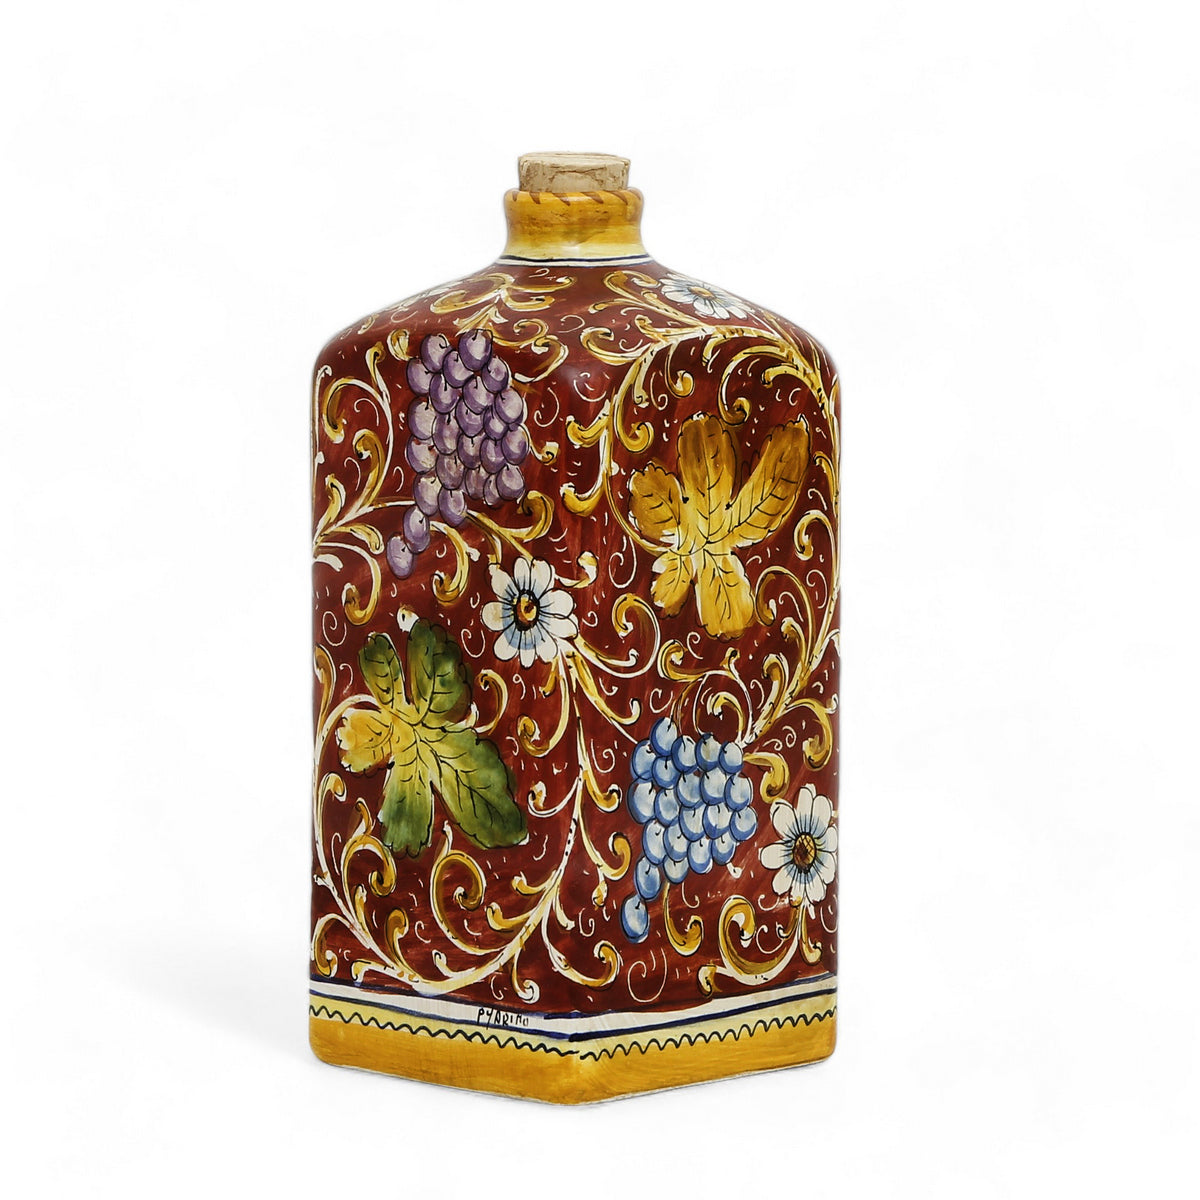 TUSCAN MAJOLICA: Old World Tuscan square bottle with cork with Leaves and grape designs on a Burgundy red background